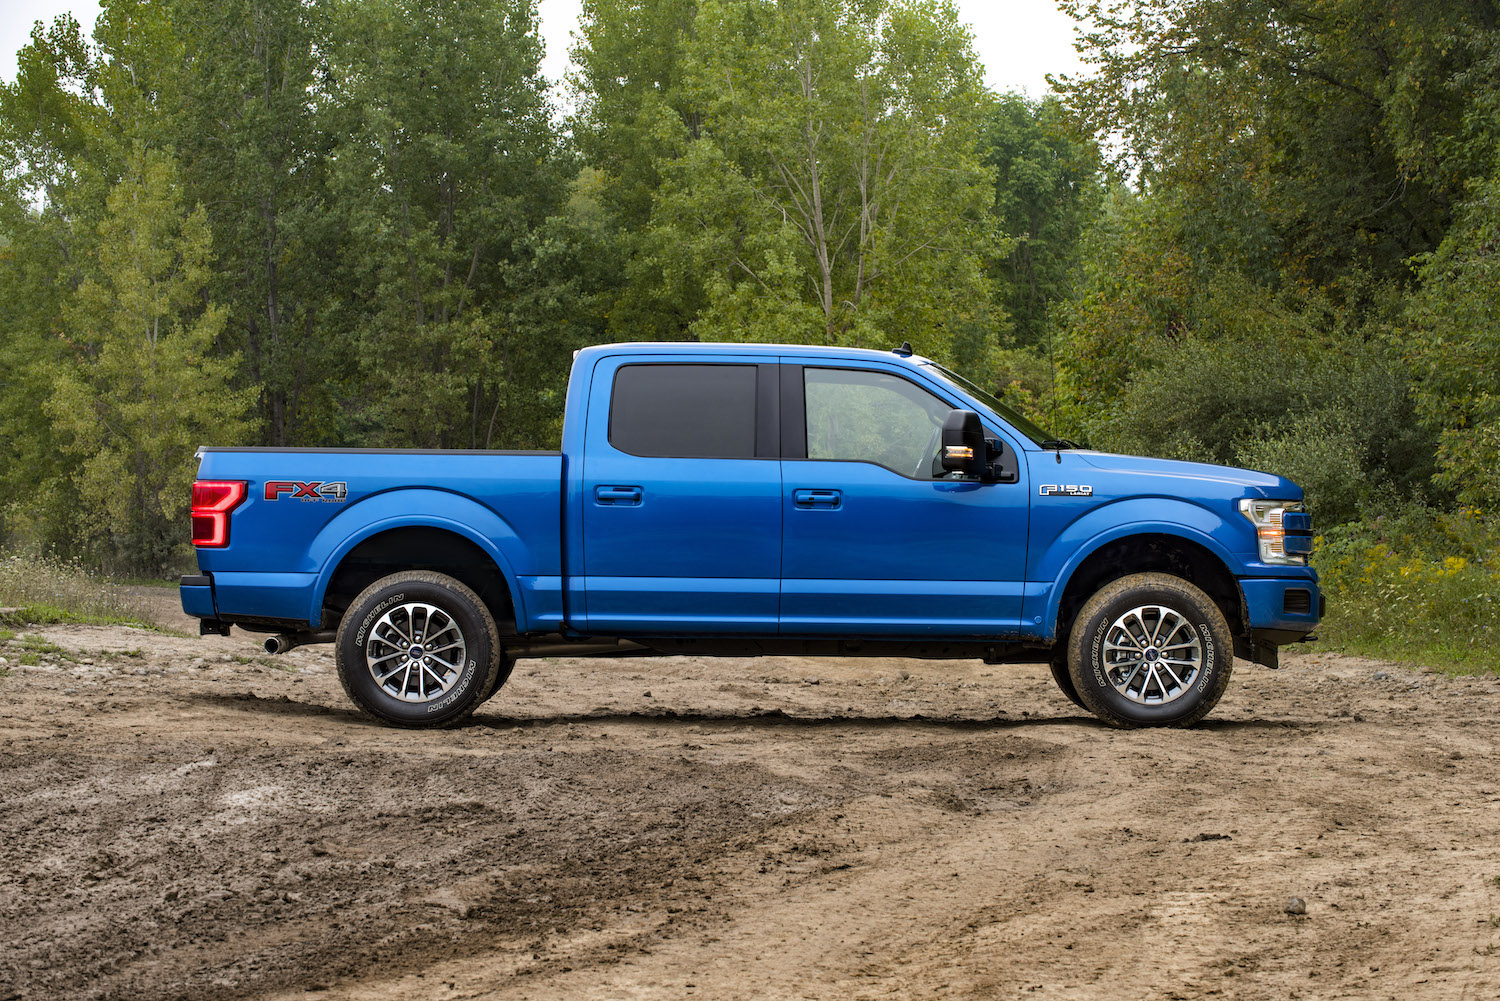 Blue Ford F-150 full-size pickup truck parked on a dirt parking lot, trees visible in the background.